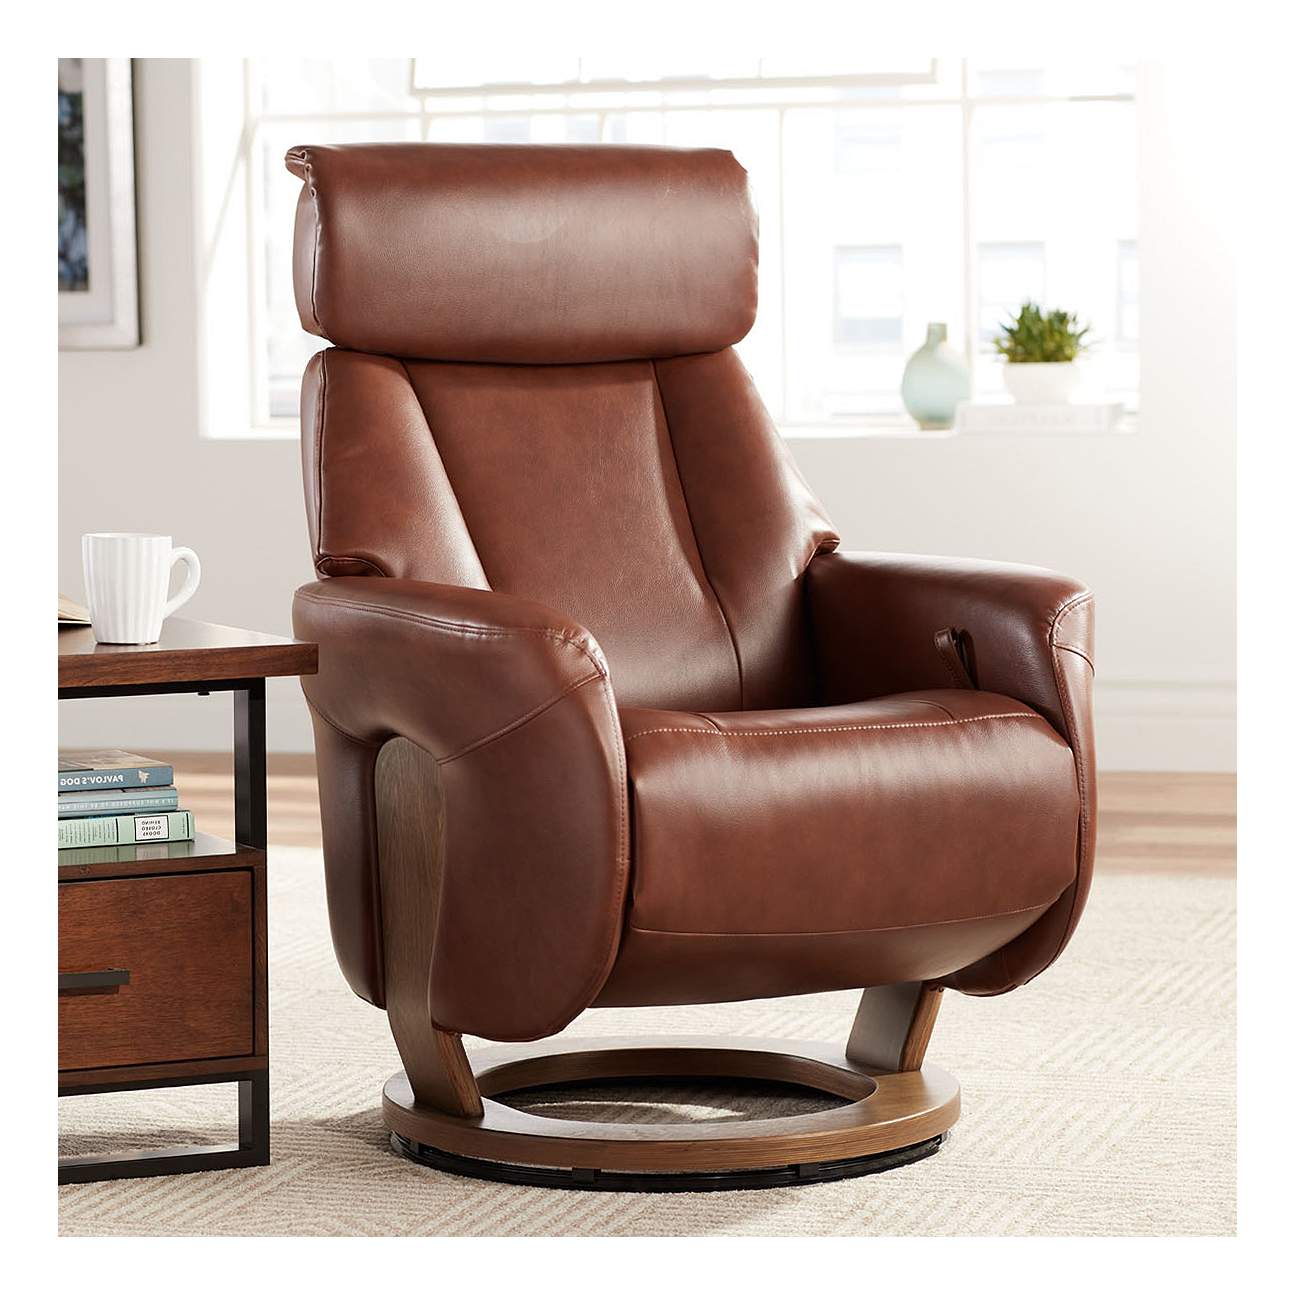 Augusta Brown Faux Leather 4-Way Modern Recliner Chair - #64P65 | Lamps